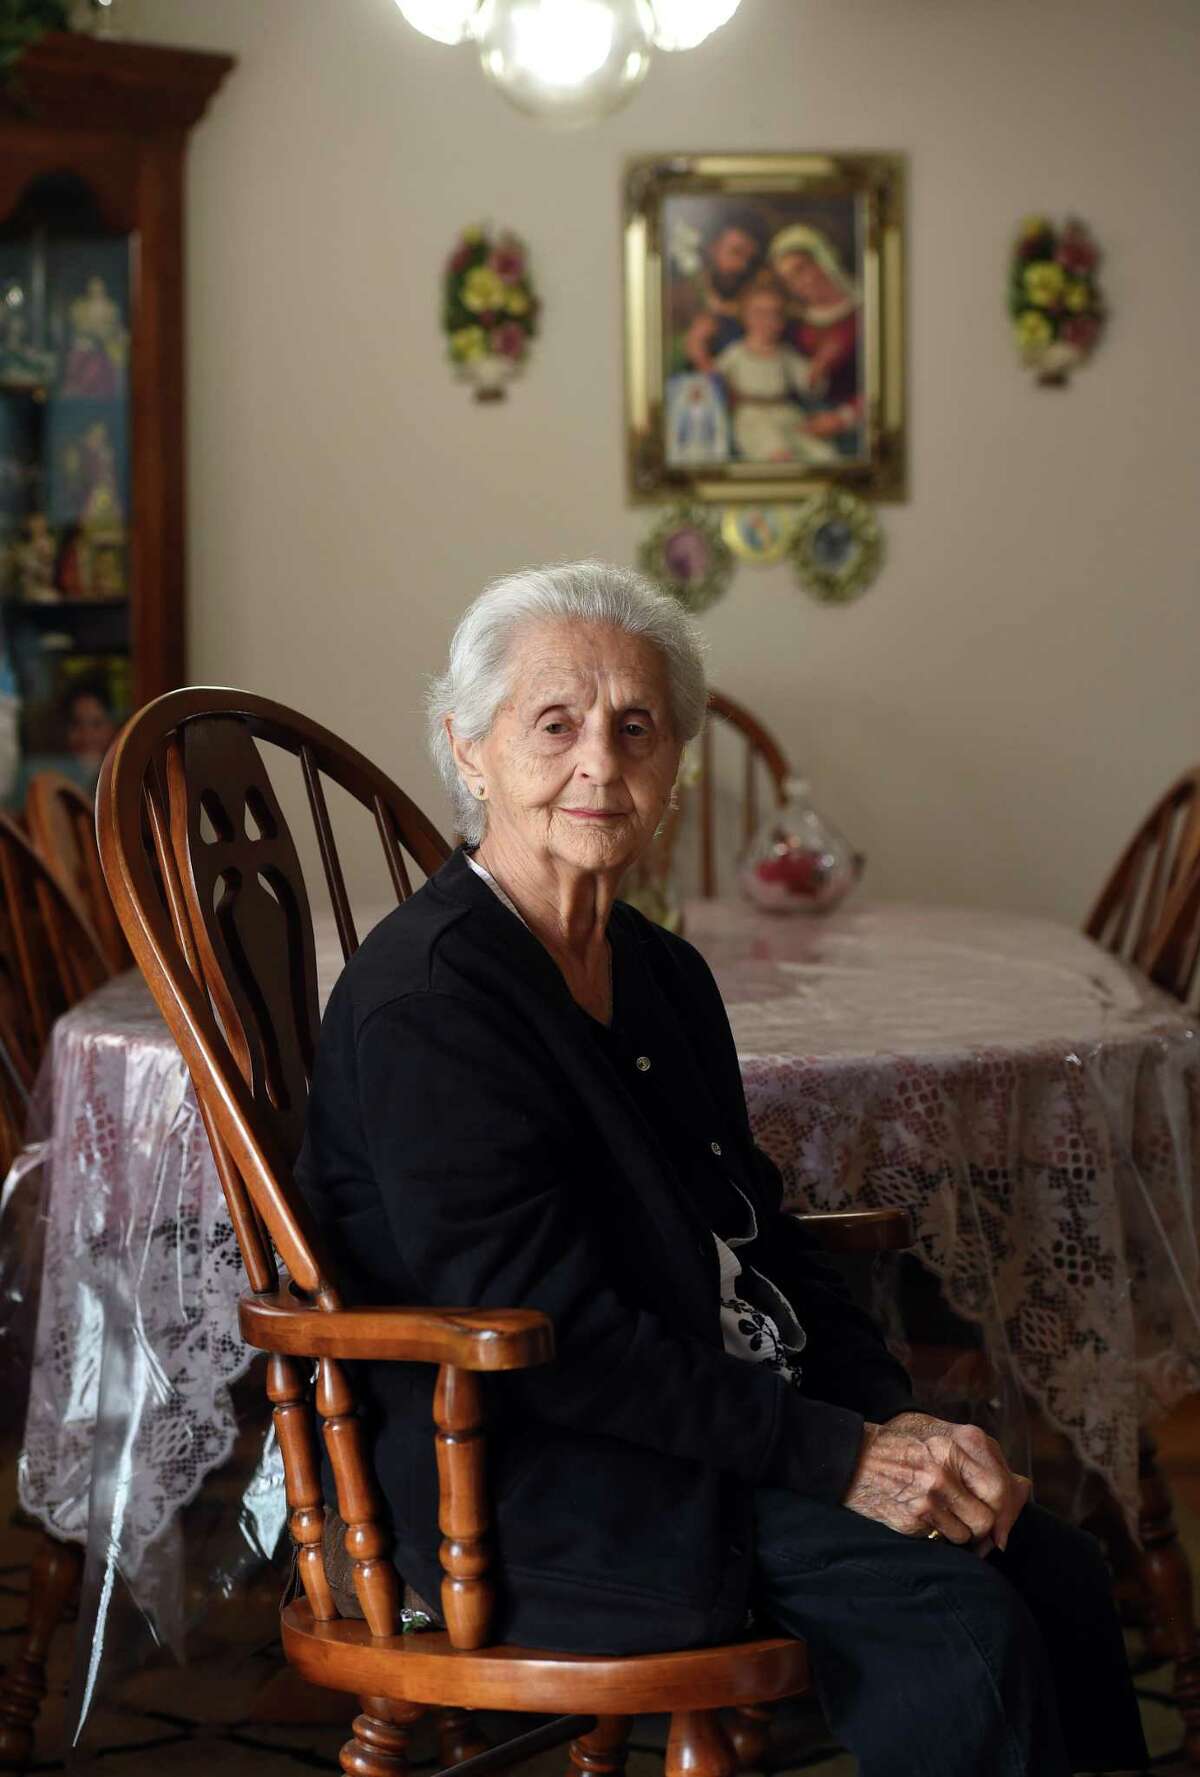 Immaculata Laudano, 93, photographed at her home on Wooster Street in New Haven on June 9, 2022.